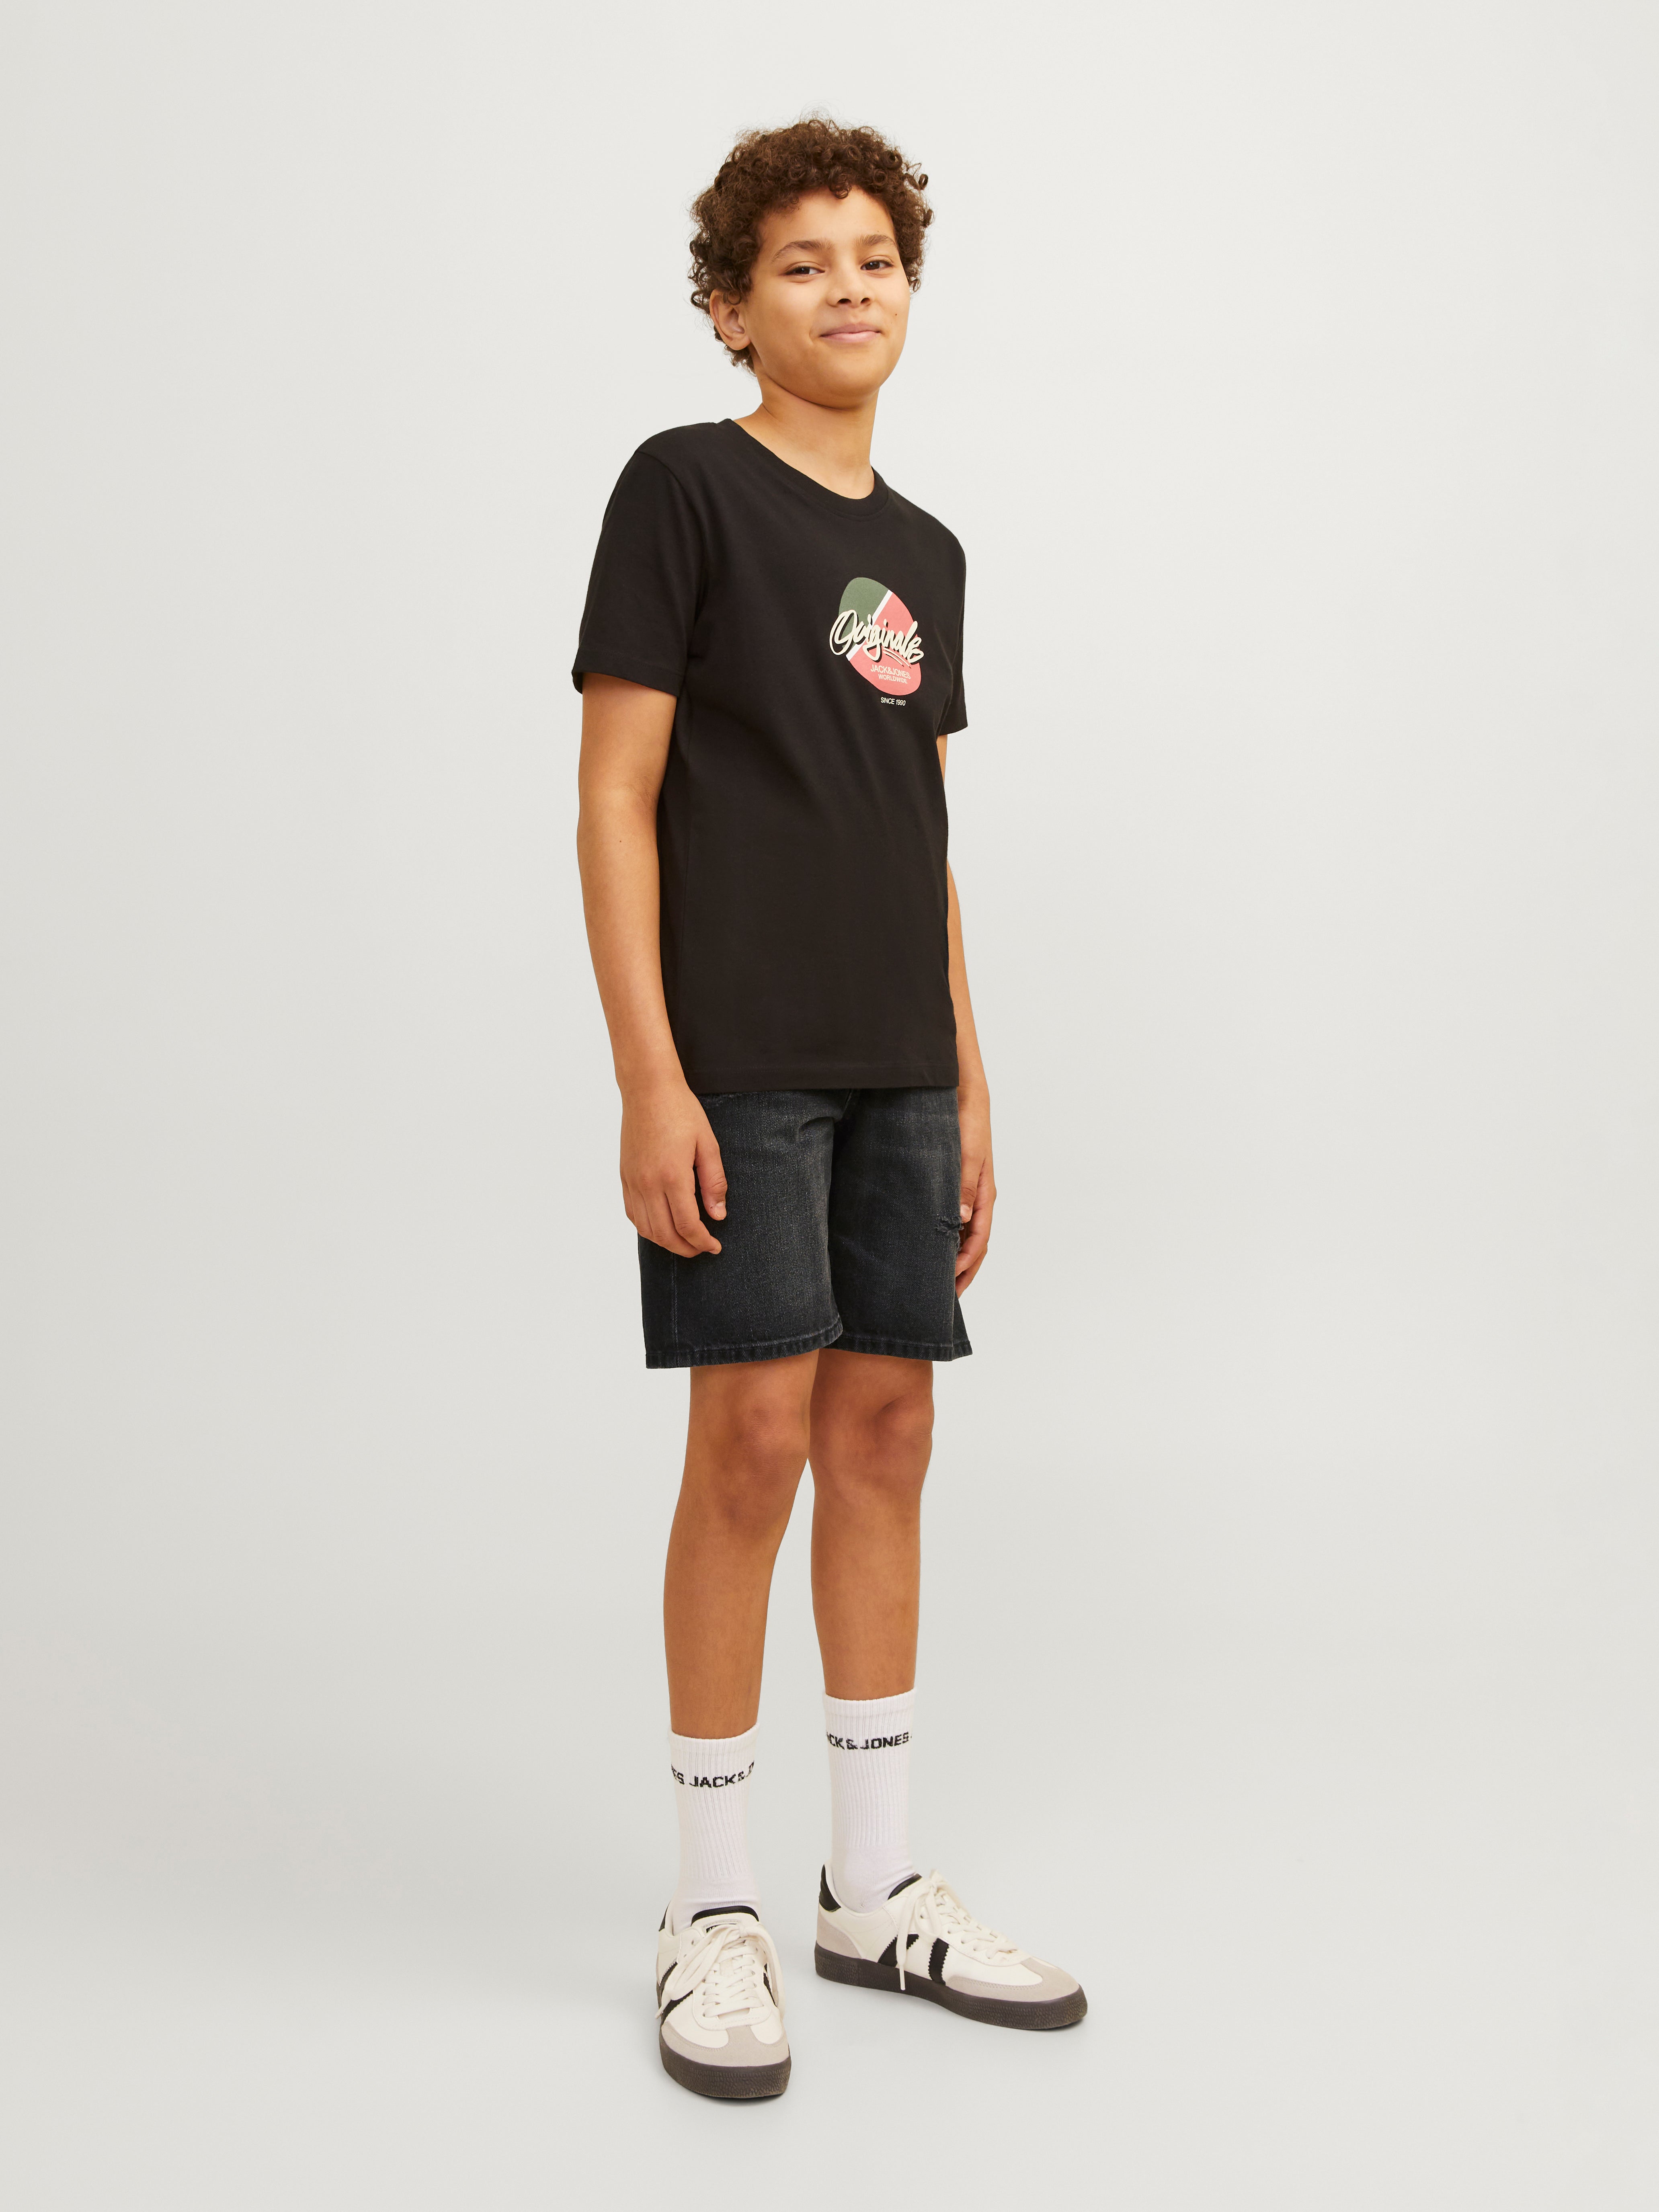 Relaxed Fit Relaxed fit shorts For boys